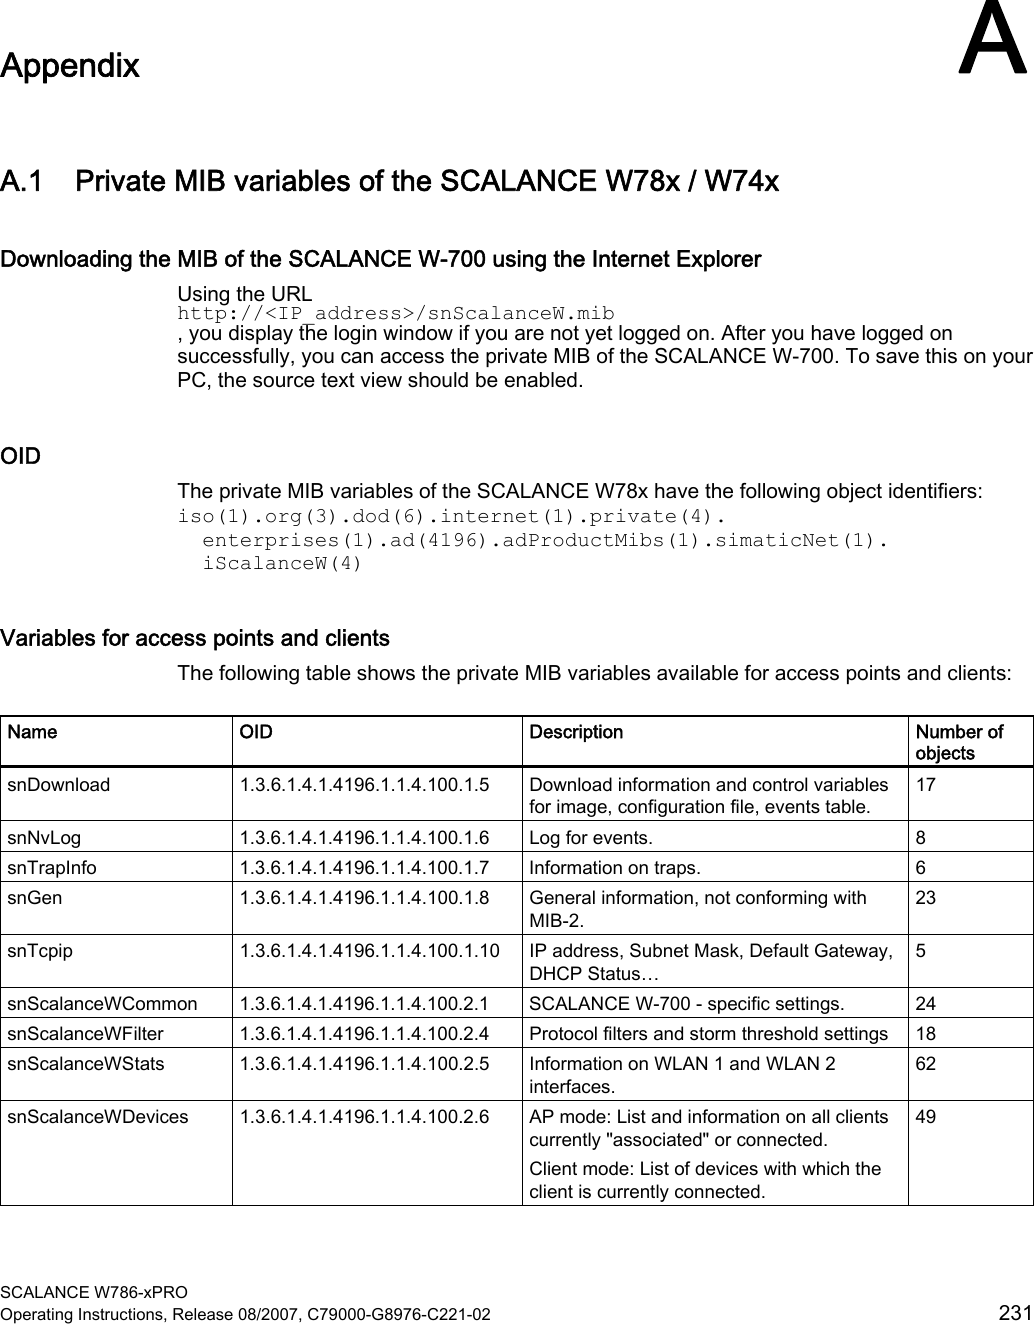  SCALANCE W786-xPRO Operating Instructions, Release 08/2007, C79000-G8976-C221-02  231 Appendix AA.1 Private MIB variables of the SCALANCE W78x / W74x Downloading the MIB of the SCALANCE W-700 using the Internet Explorer Using the URL  http://&lt;IP_address&gt;/snScalanceW.mib , you display the login window if you are not yet logged on. After you have logged on successfully, you can access the private MIB of the SCALANCE W-700. To save this on your PC, the source text view should be enabled. OID The private MIB variables of the SCALANCE W78x have the following object identifiers: iso(1).org(3).dod(6).internet(1).private(4).   enterprises(1).ad(4196).adProductMibs(1).simaticNet(1).   iScalanceW(4) Variables for access points and clients The following table shows the private MIB variables available for access points and clients:  Name OID  Description  Number of objects snDownload 1.3.6.1.4.1.4196.1.1.4.100.1.5 Download information and control variables for image, configuration file, events table. 17 snNvLog  1.3.6.1.4.1.4196.1.1.4.100.1.6  Log for events.   8 snTrapInfo 1.3.6.1.4.1.4196.1.1.4.100.1.7 Information on traps.  6 snGen 1.3.6.1.4.1.4196.1.1.4.100.1.8 General information, not conforming with MIB-2. 23 snTcpip 1.3.6.1.4.1.4196.1.1.4.100.1.10 IP address, Subnet Mask, Default Gateway, DHCP Status… 5 snScalanceWCommon 1.3.6.1.4.1.4196.1.1.4.100.2.1  SCALANCE W-700 - specific settings.  24 snScalanceWFilter 1.3.6.1.4.1.4196.1.1.4.100.2.4 Protocol filters and storm threshold settings  18 snScalanceWStats 1.3.6.1.4.1.4196.1.1.4.100.2.5 Information on WLAN 1 and WLAN 2 interfaces. 62 snScalanceWDevices 1.3.6.1.4.1.4196.1.1.4.100.2.6  AP mode: List and information on all clients currently &quot;associated&quot; or connected. Client mode: List of devices with which the client is currently connected. 49 